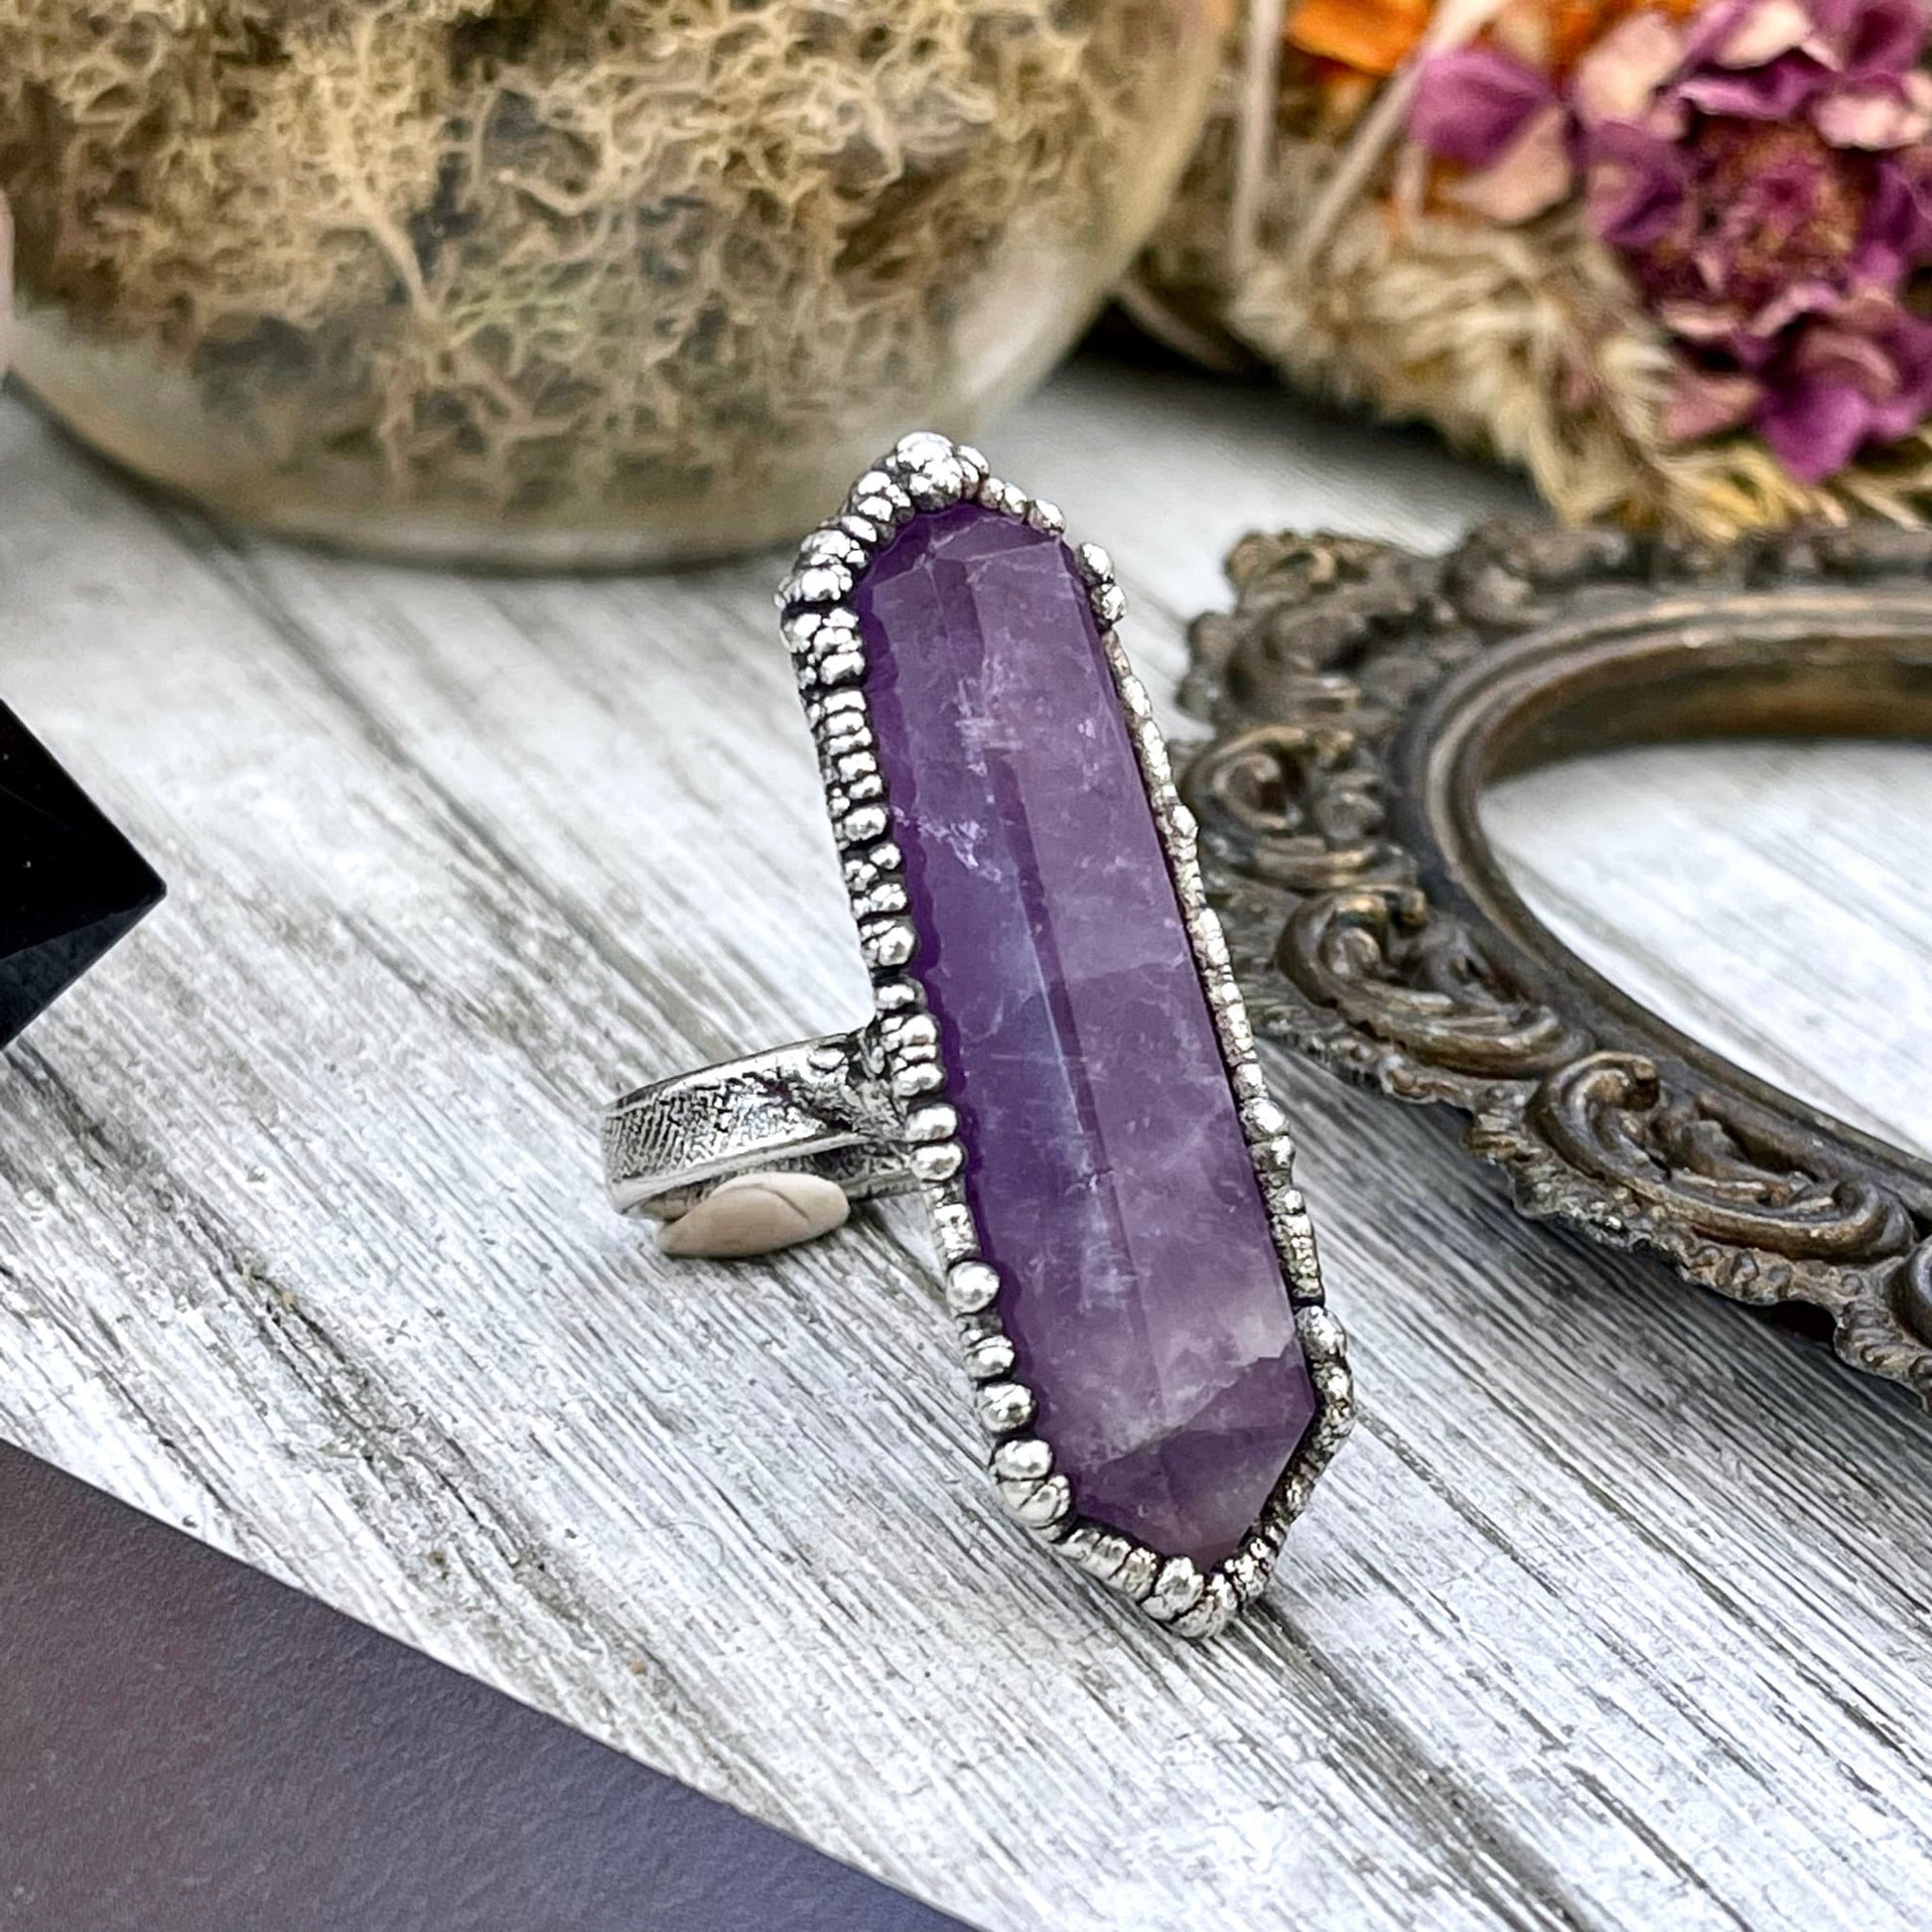 Purple Amethyst Crystal Point Ring Set in Fine Silver Size 5 6 7 8 9 10 / Foxlark Collection One of a Kind - Foxlark Crystal Jewelry